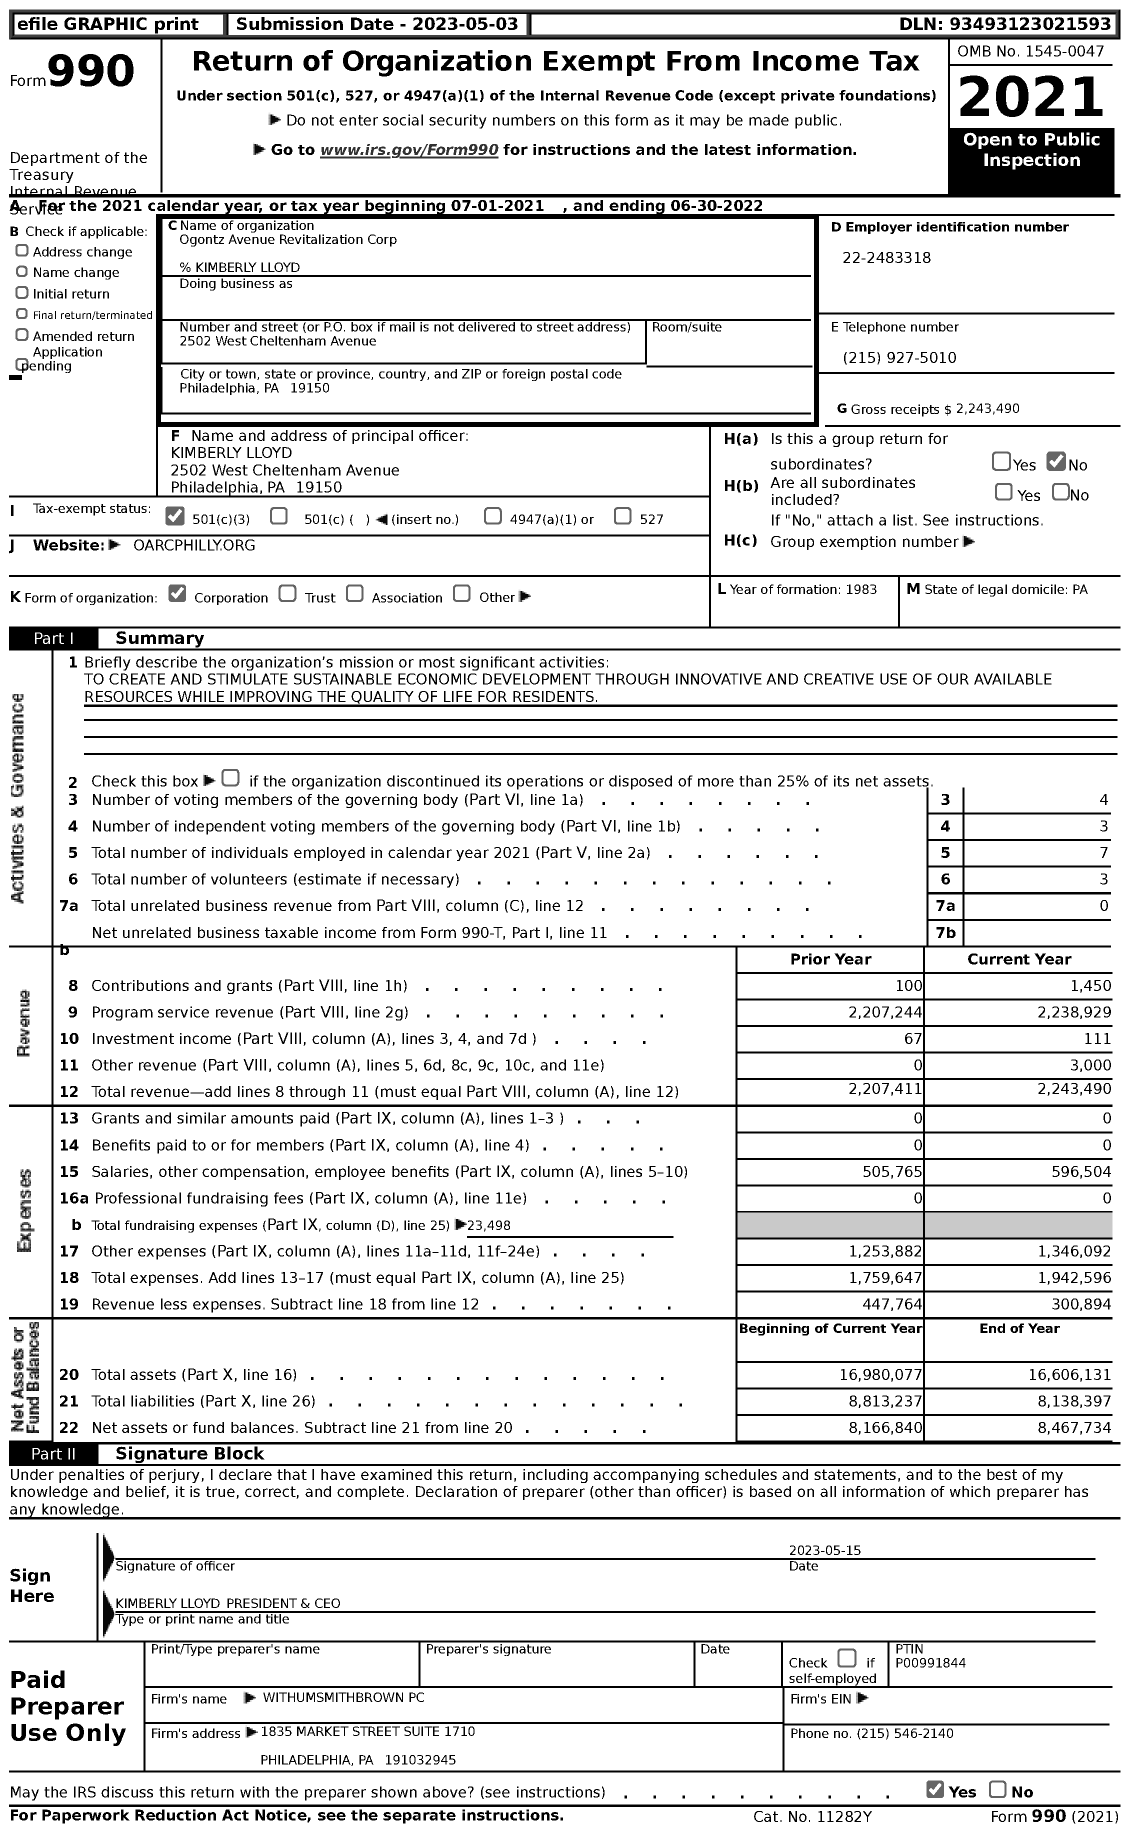 Image of first page of 2021 Form 990 for Ogontz Avenue Revitalization Corp